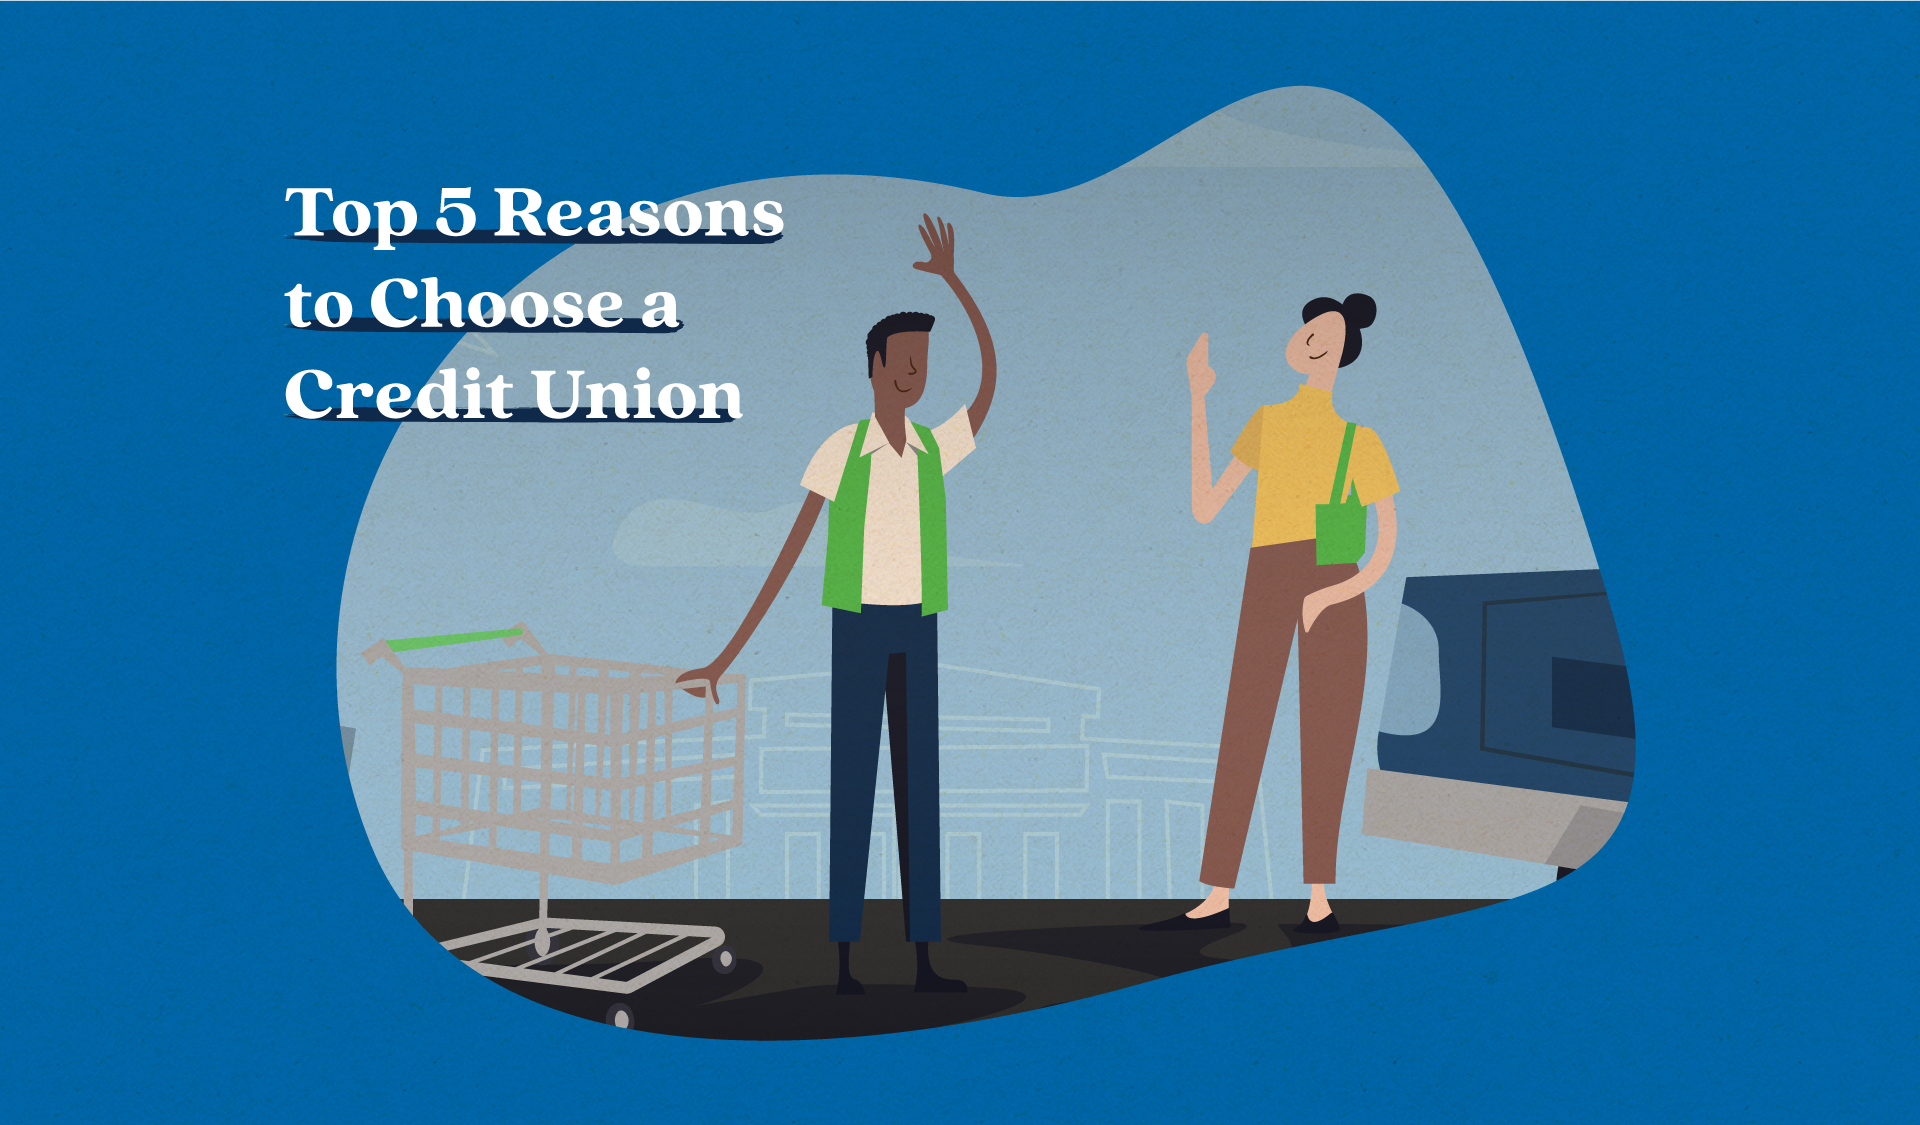 Top 5 Reasons to Choose a Credit Union